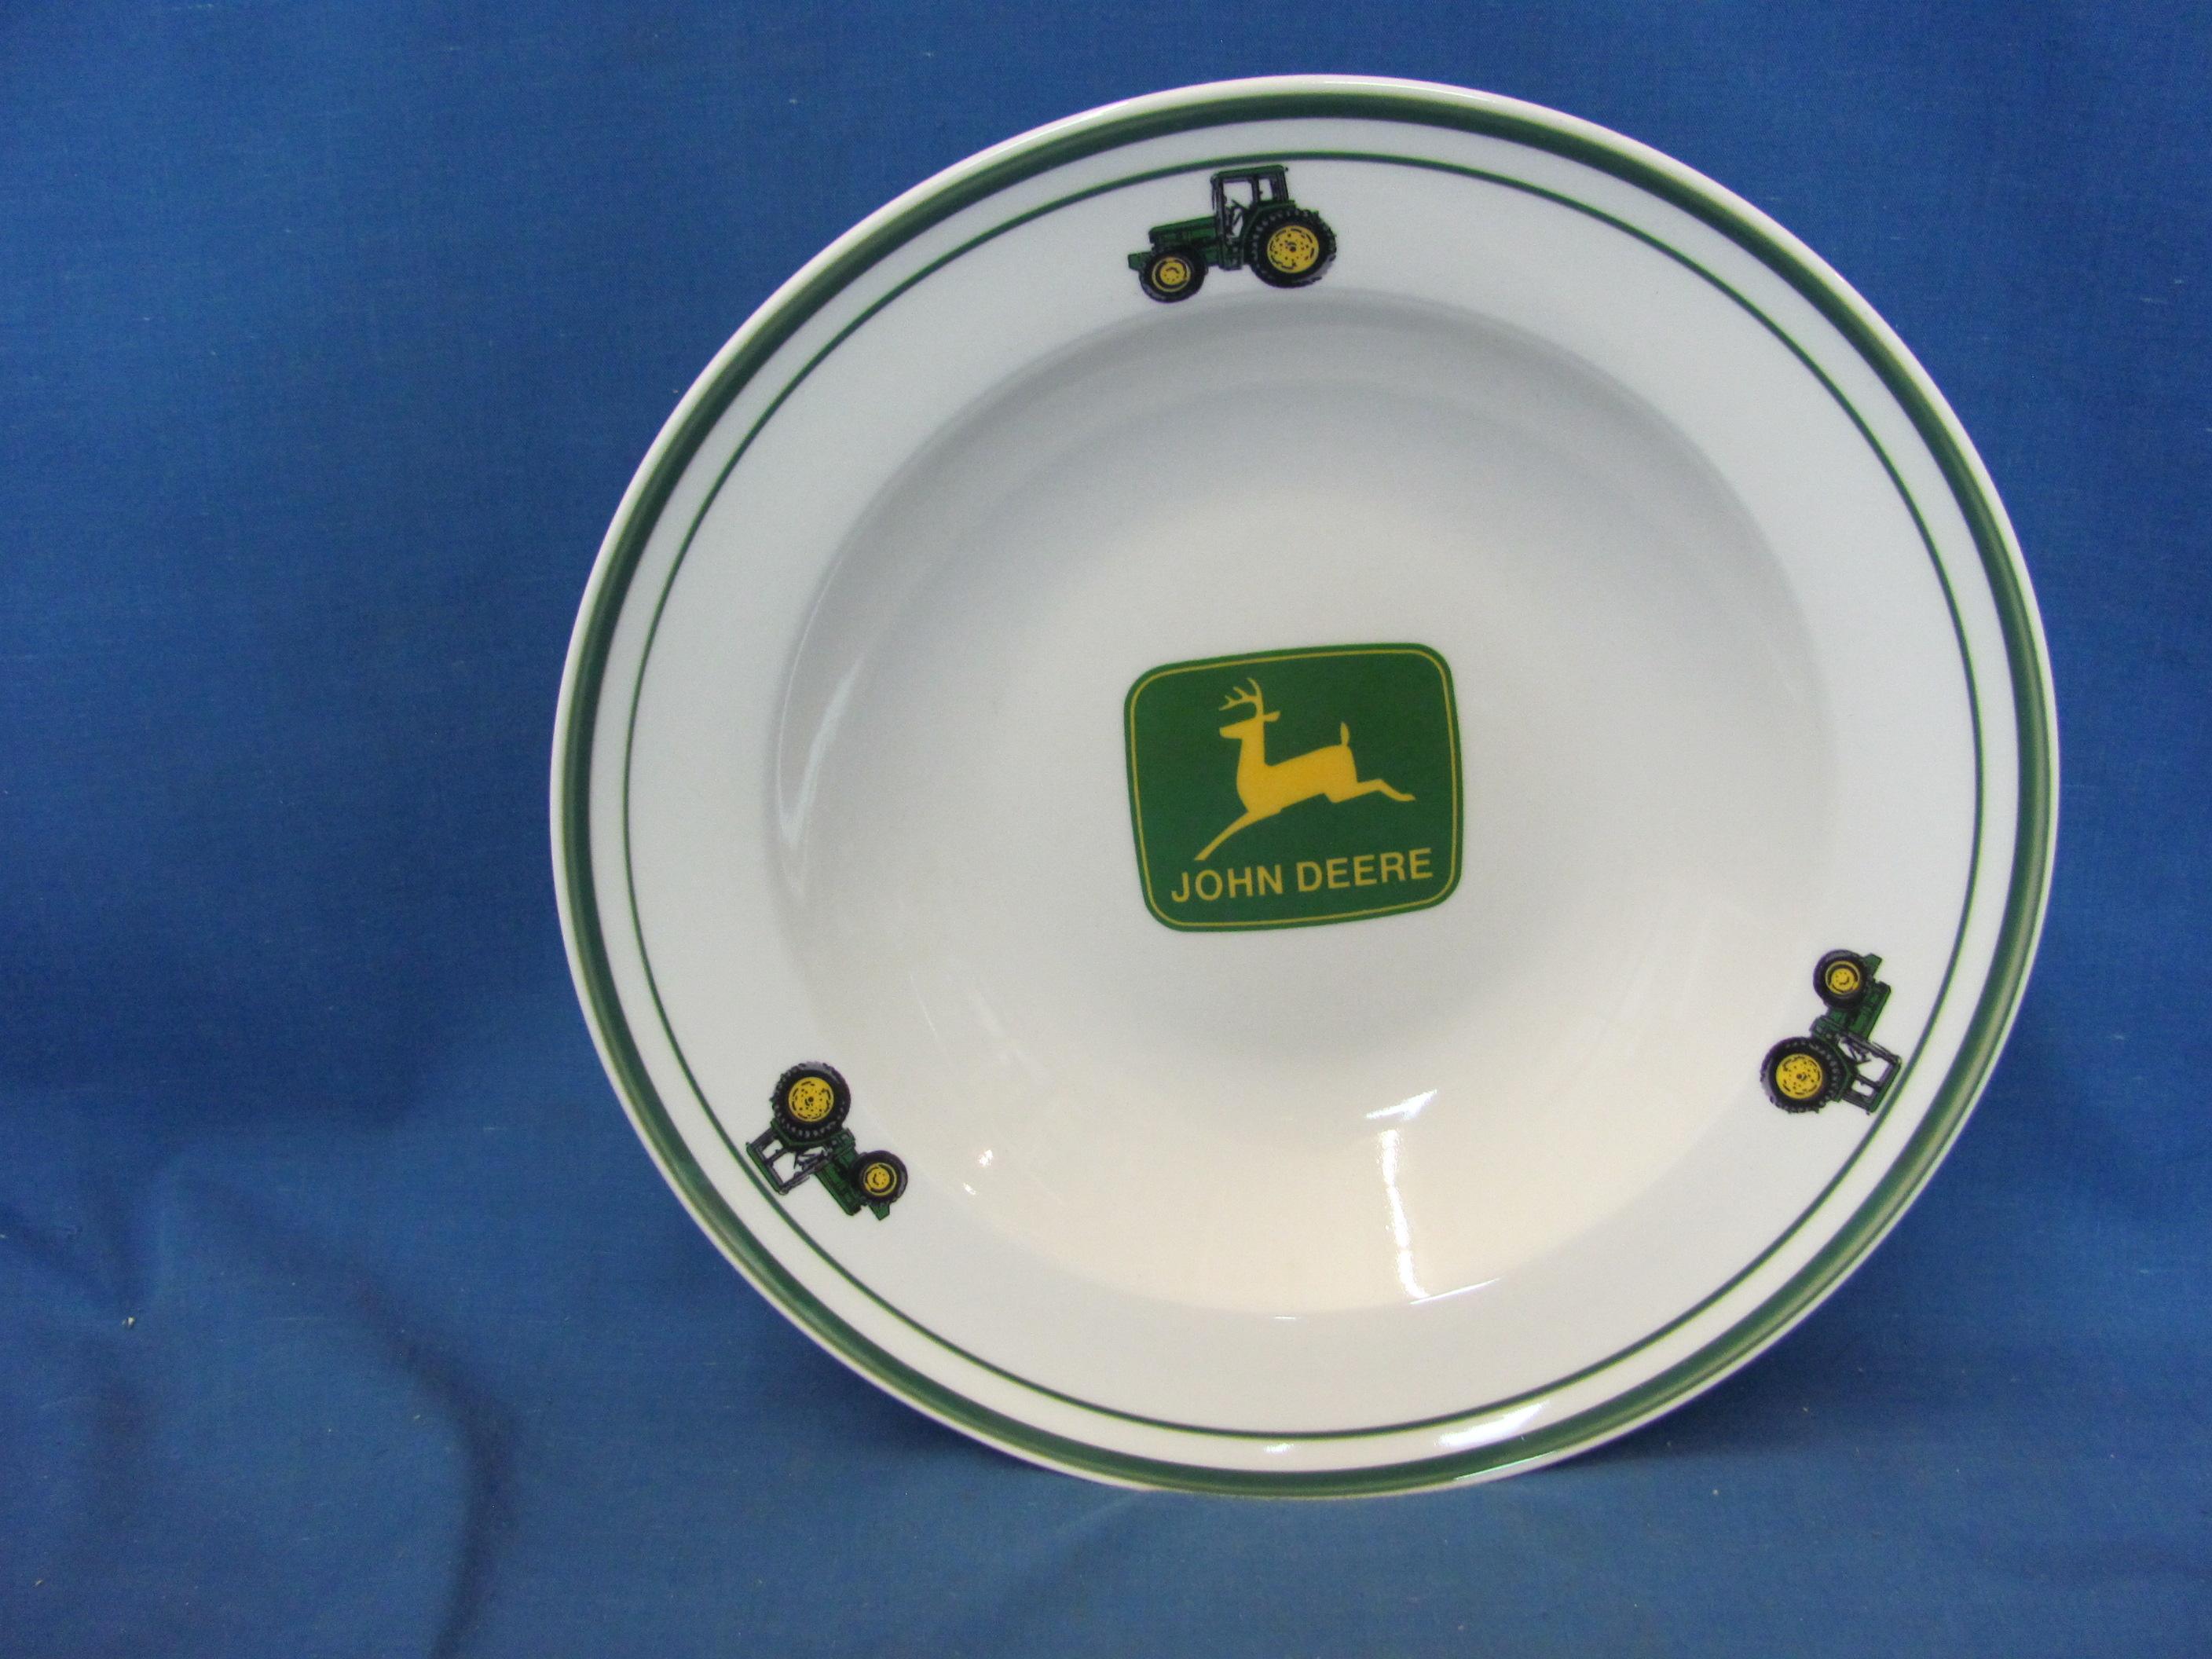 Gibson John Deere Ceramic 12 Piece Dinnerware Set  – Don't Appear To Have Been Used